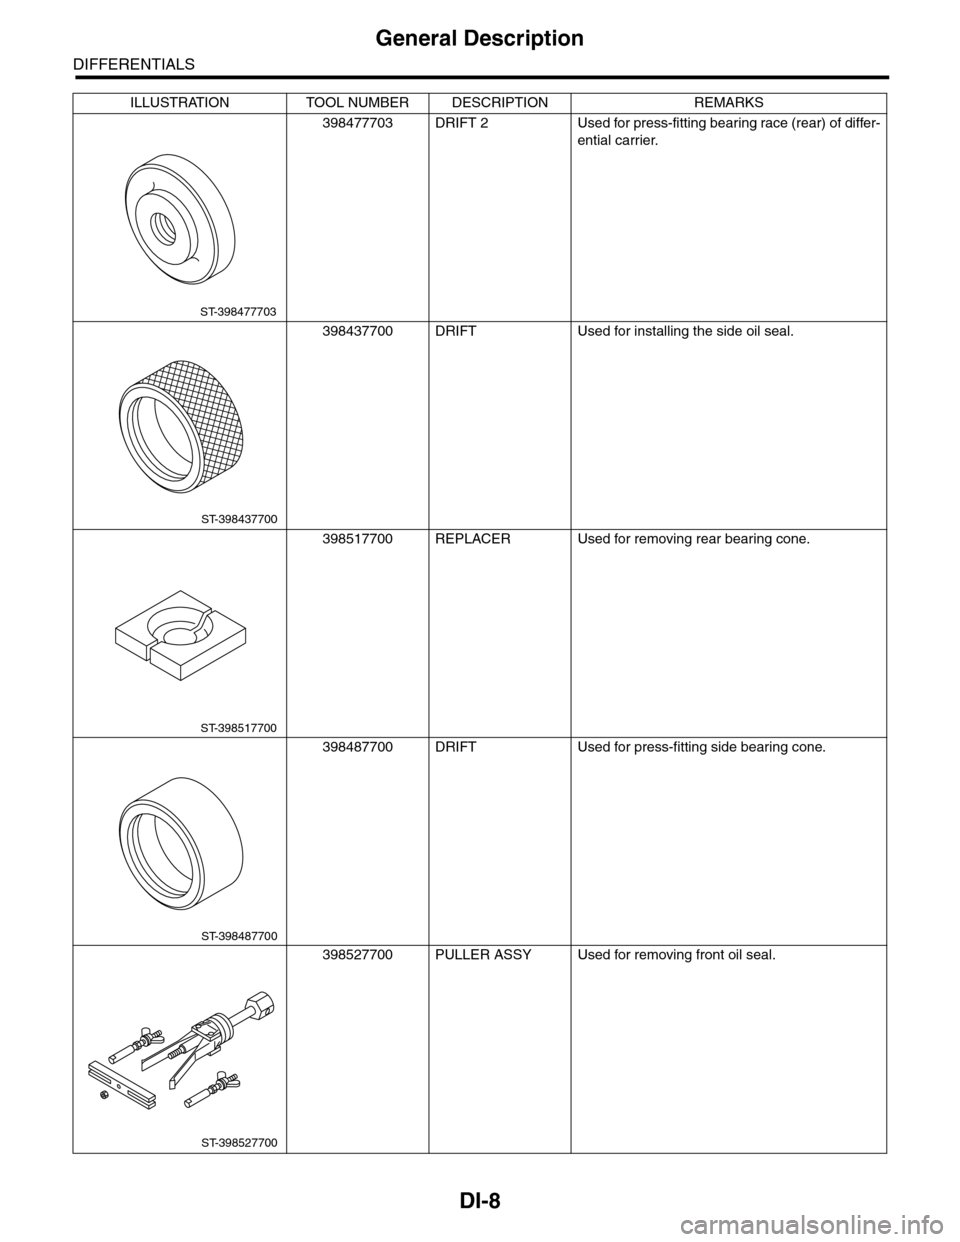 SUBARU TRIBECA 2009 1.G Service Workshop Manual DI-8
General Description
DIFFERENTIALS
398477703 DRIFT 2 Used for press-fitting bearing race (rear) of differ-
ential carrier.
398437700 DRIFT Used for installing the side oil seal.
398517700 REPLACER